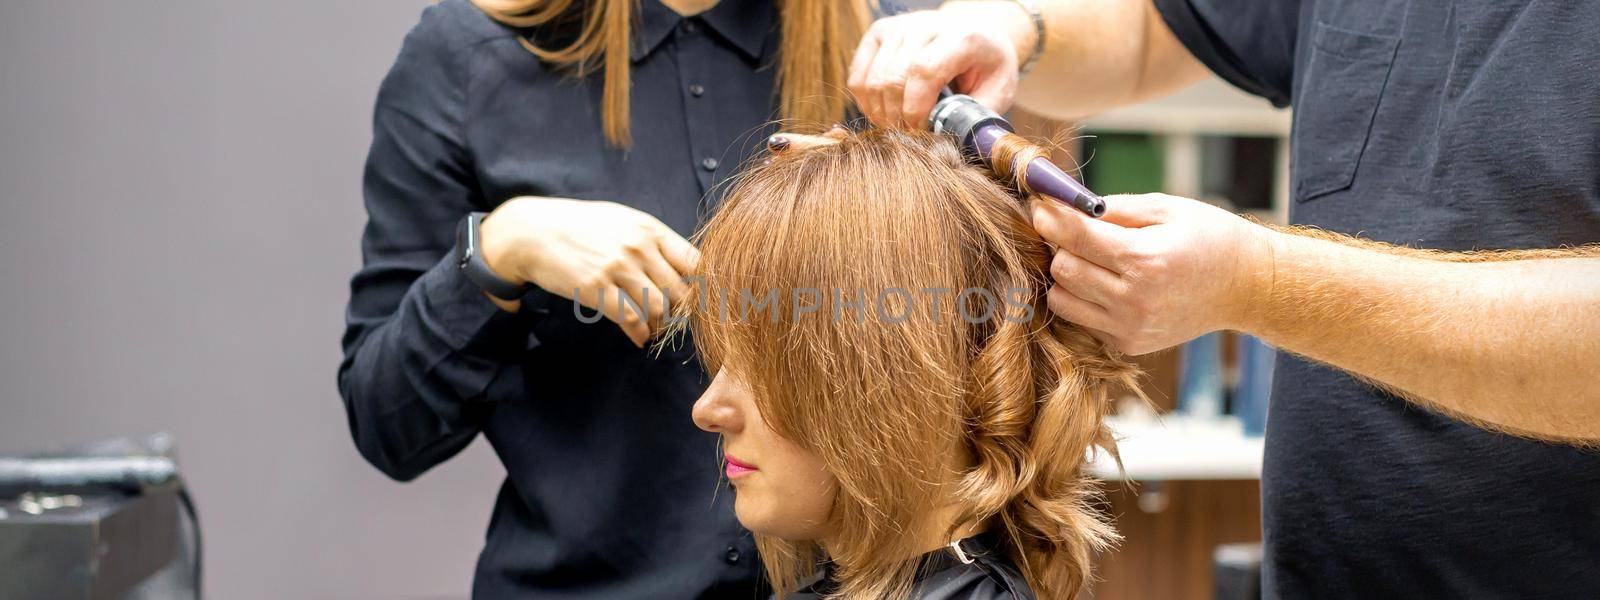 Two hairstylists make curls hairstyle of long brown hair with the curling iron in hairdresser salon. by okskukuruza